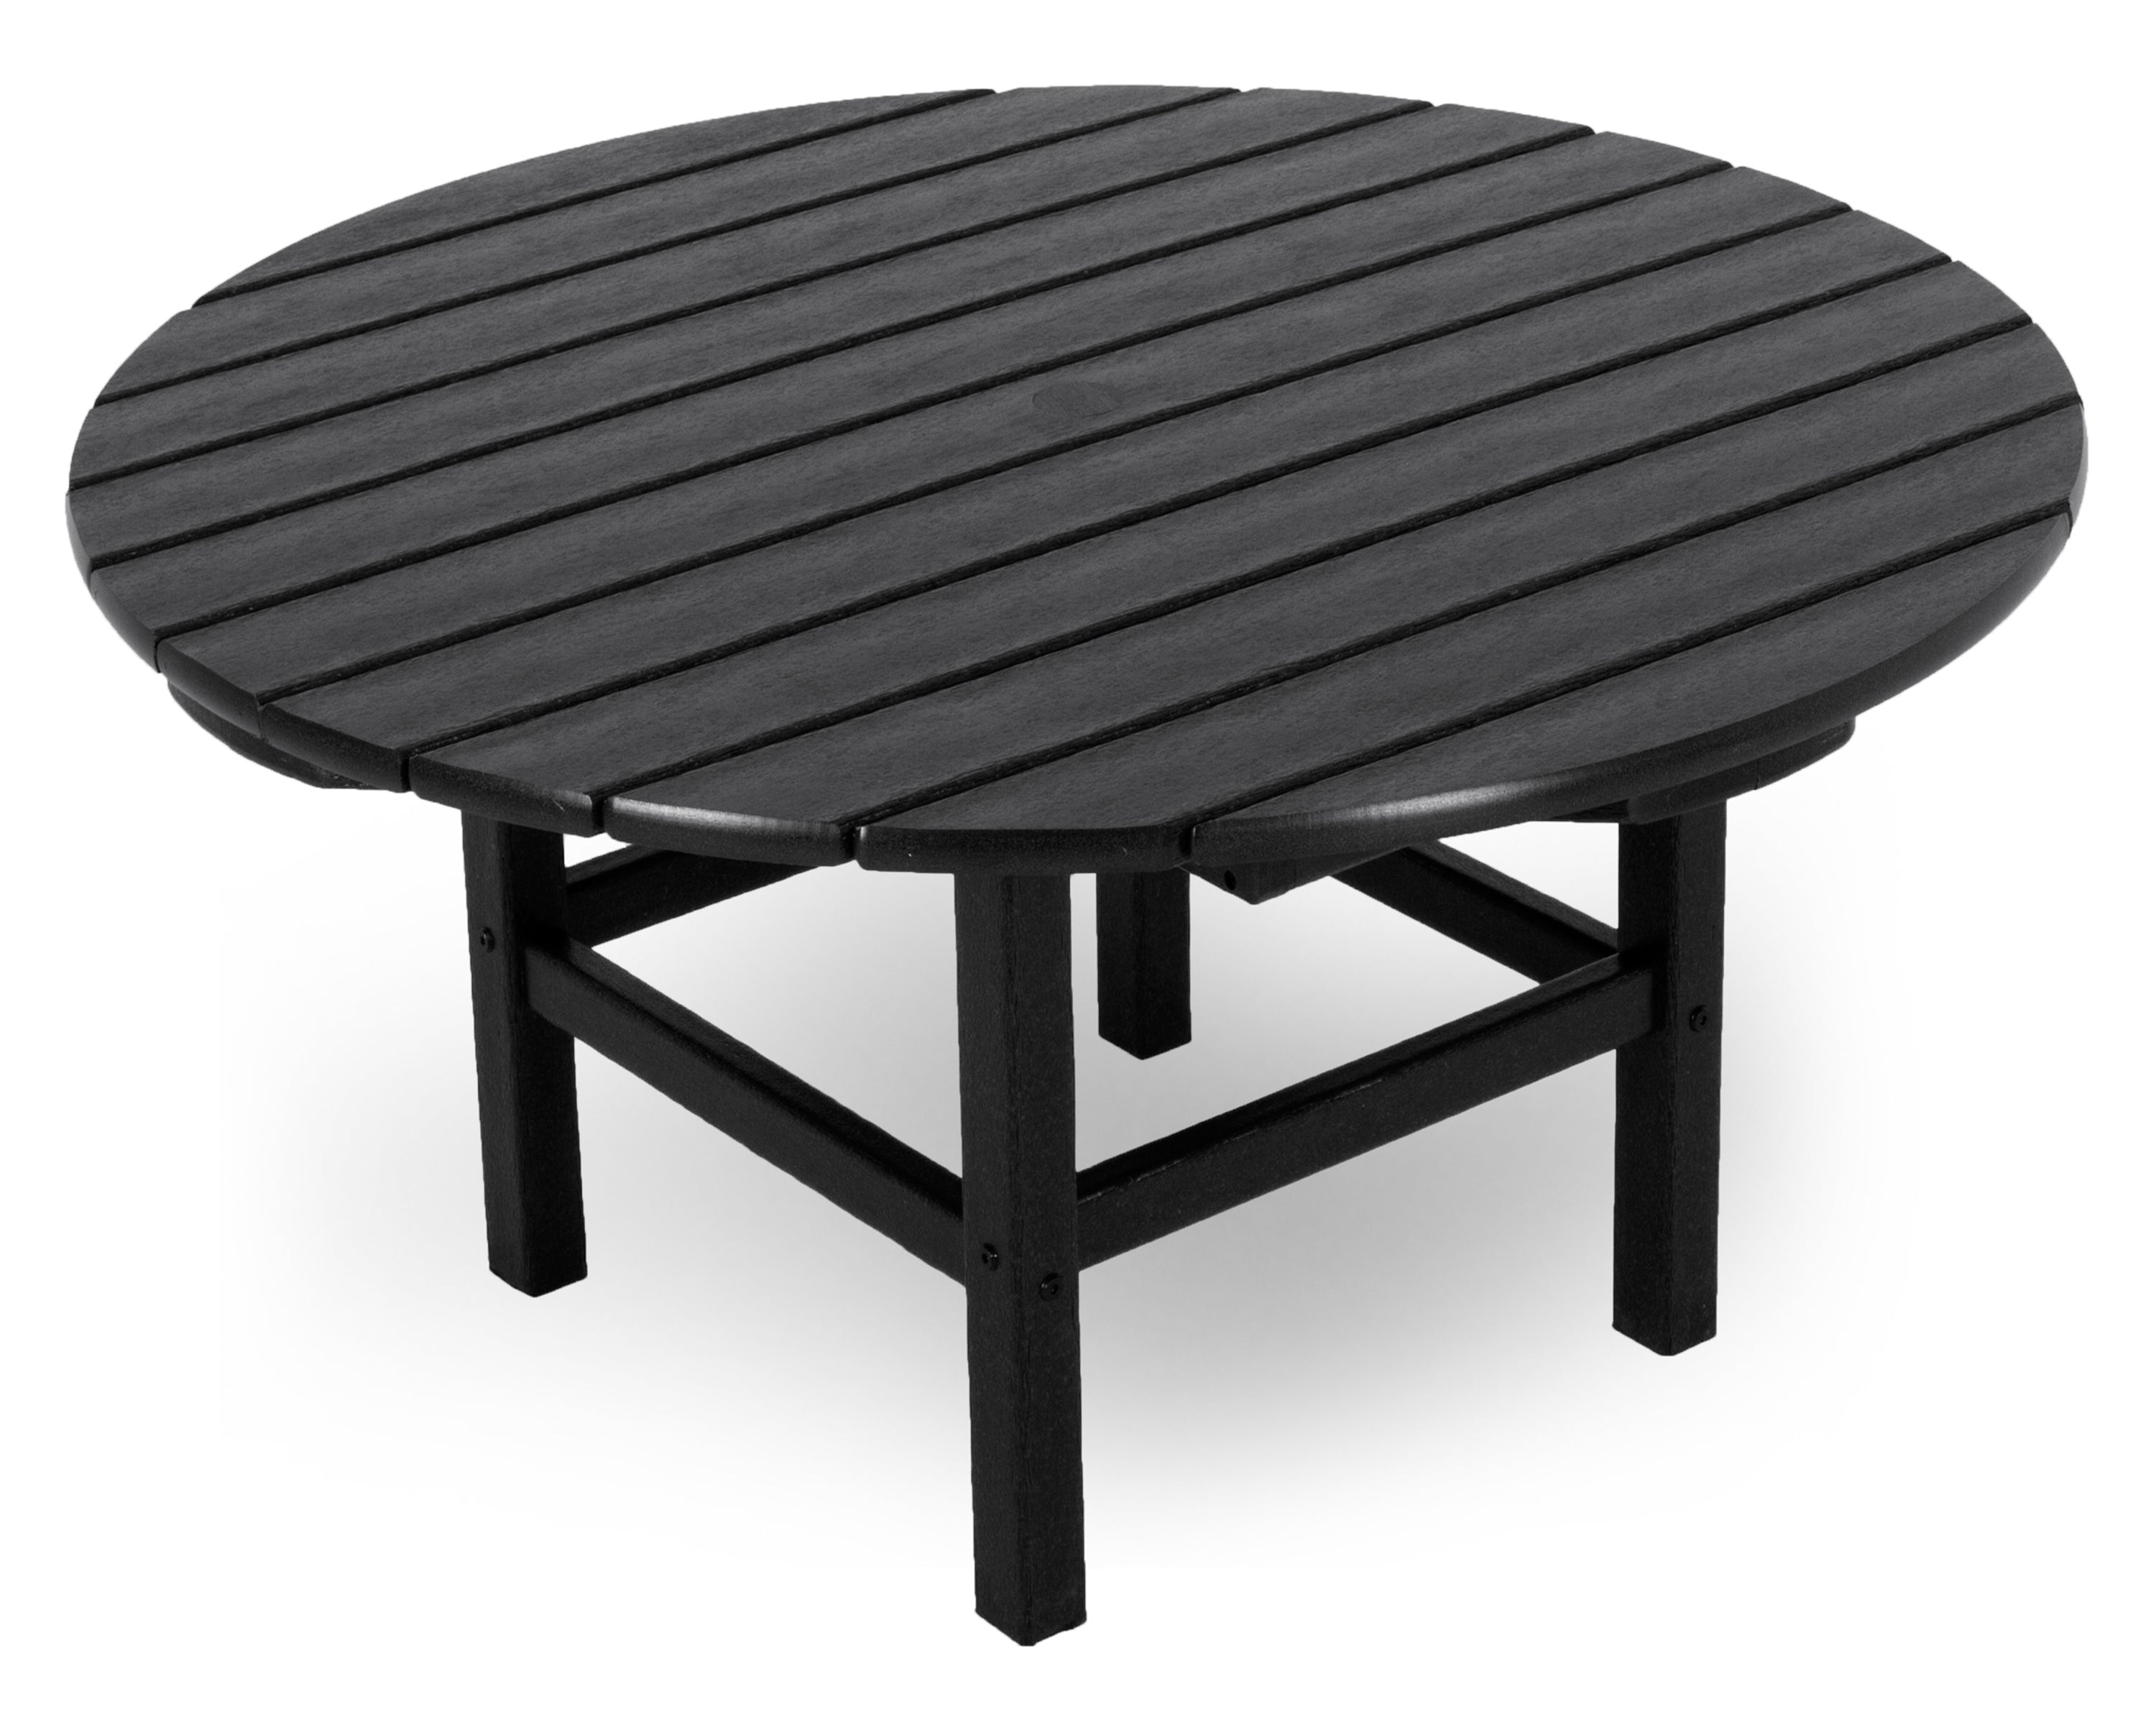 Polywood Outdoor Tables Black POLYWOOD Round 38 inch Conversation Table